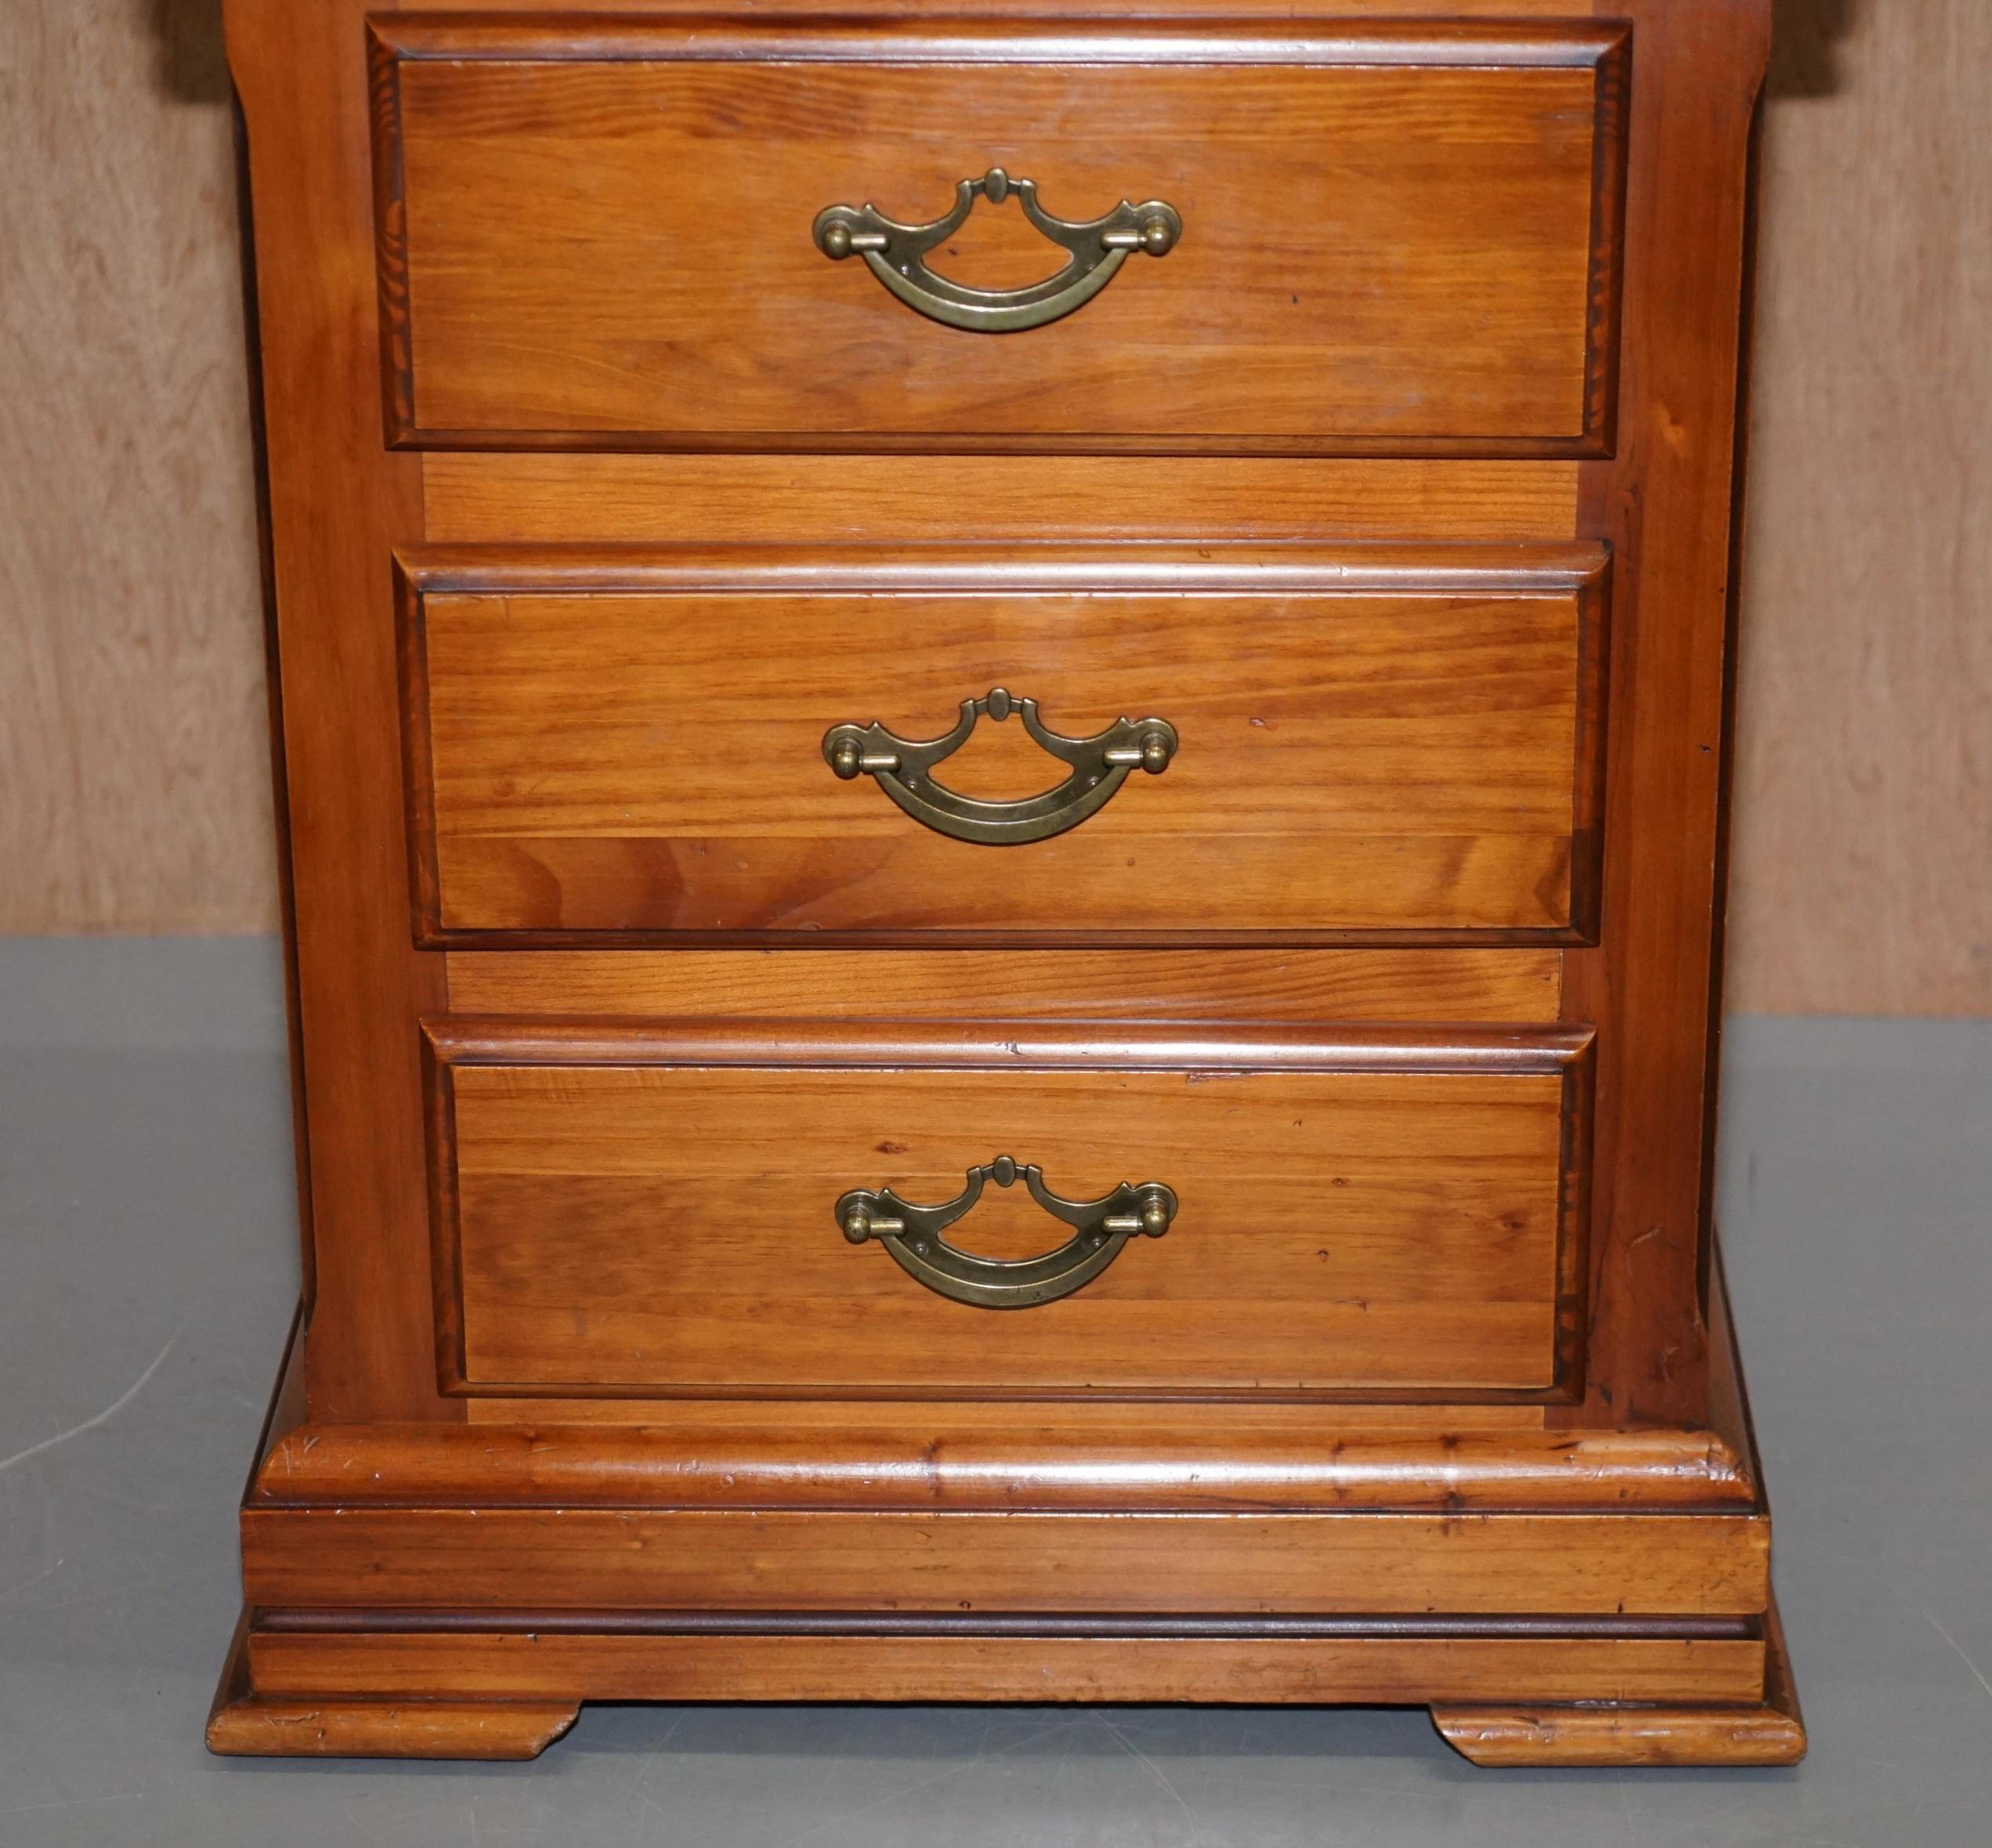 Pair of Bedside Table Drawers with Four Drawers Each, Cherry Color Wood 8